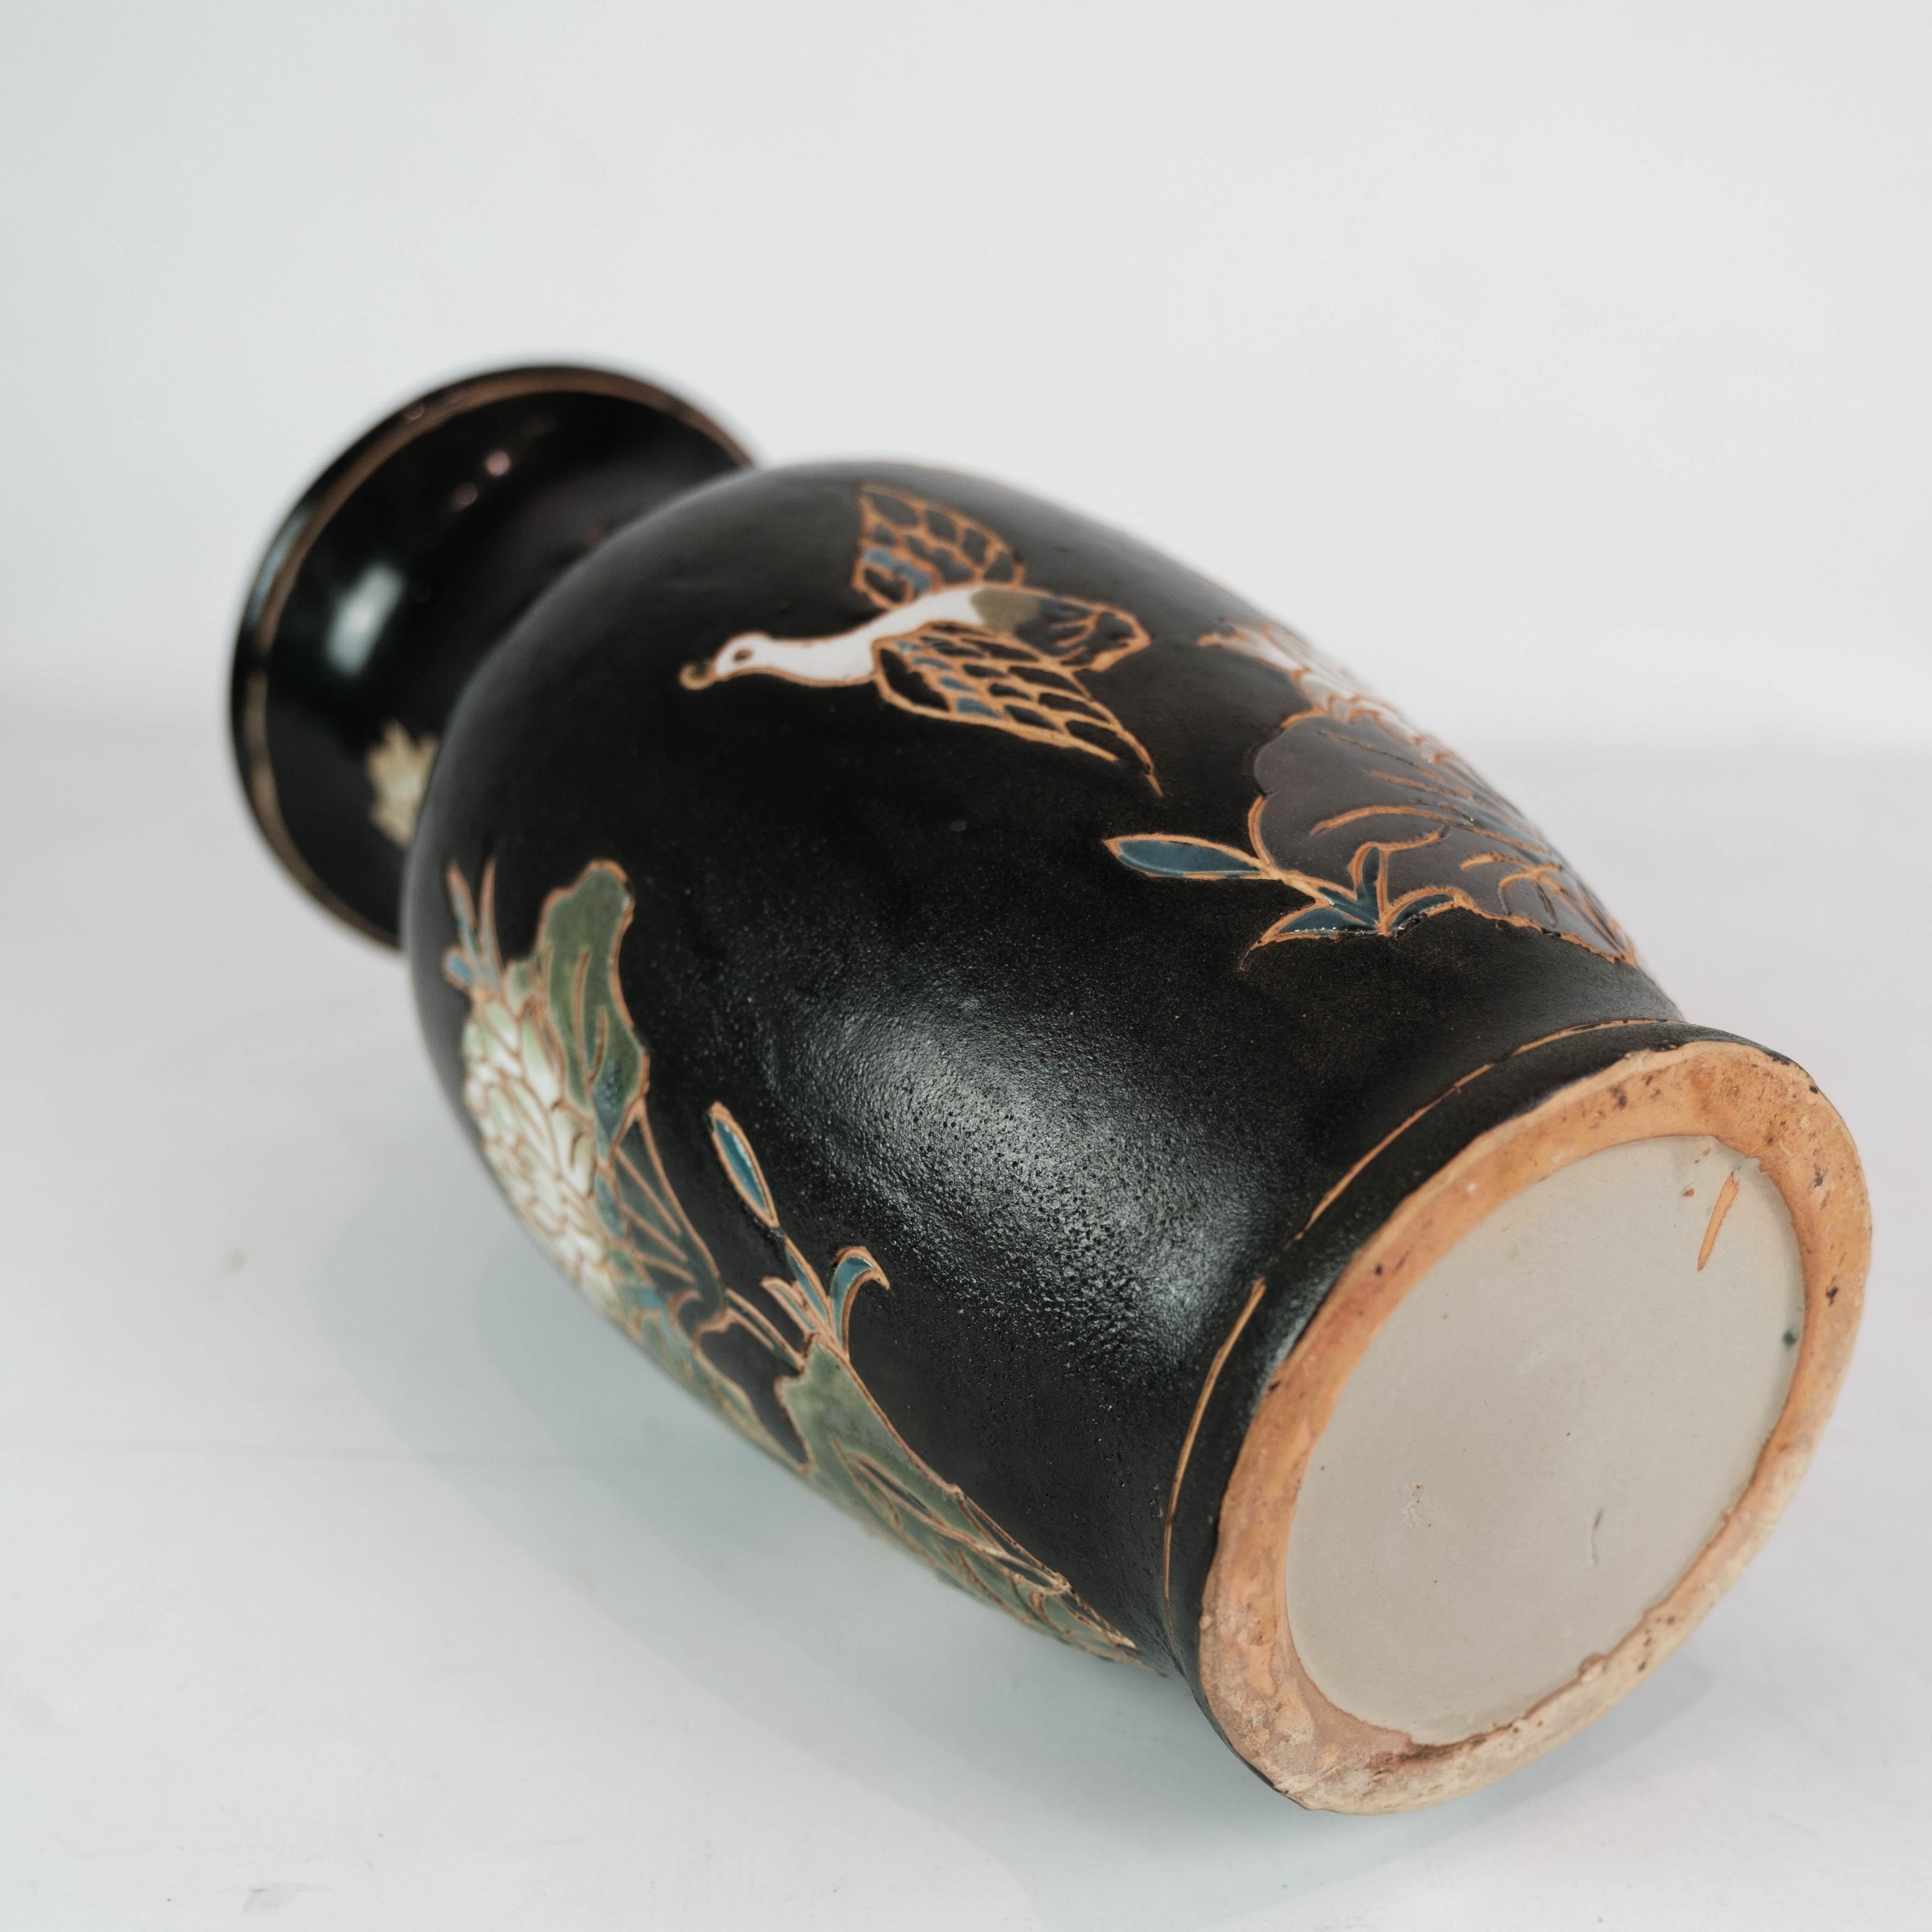 Ceramic Vase With Black Glaze & Decorated With Flowers From 1960s For Sale 2